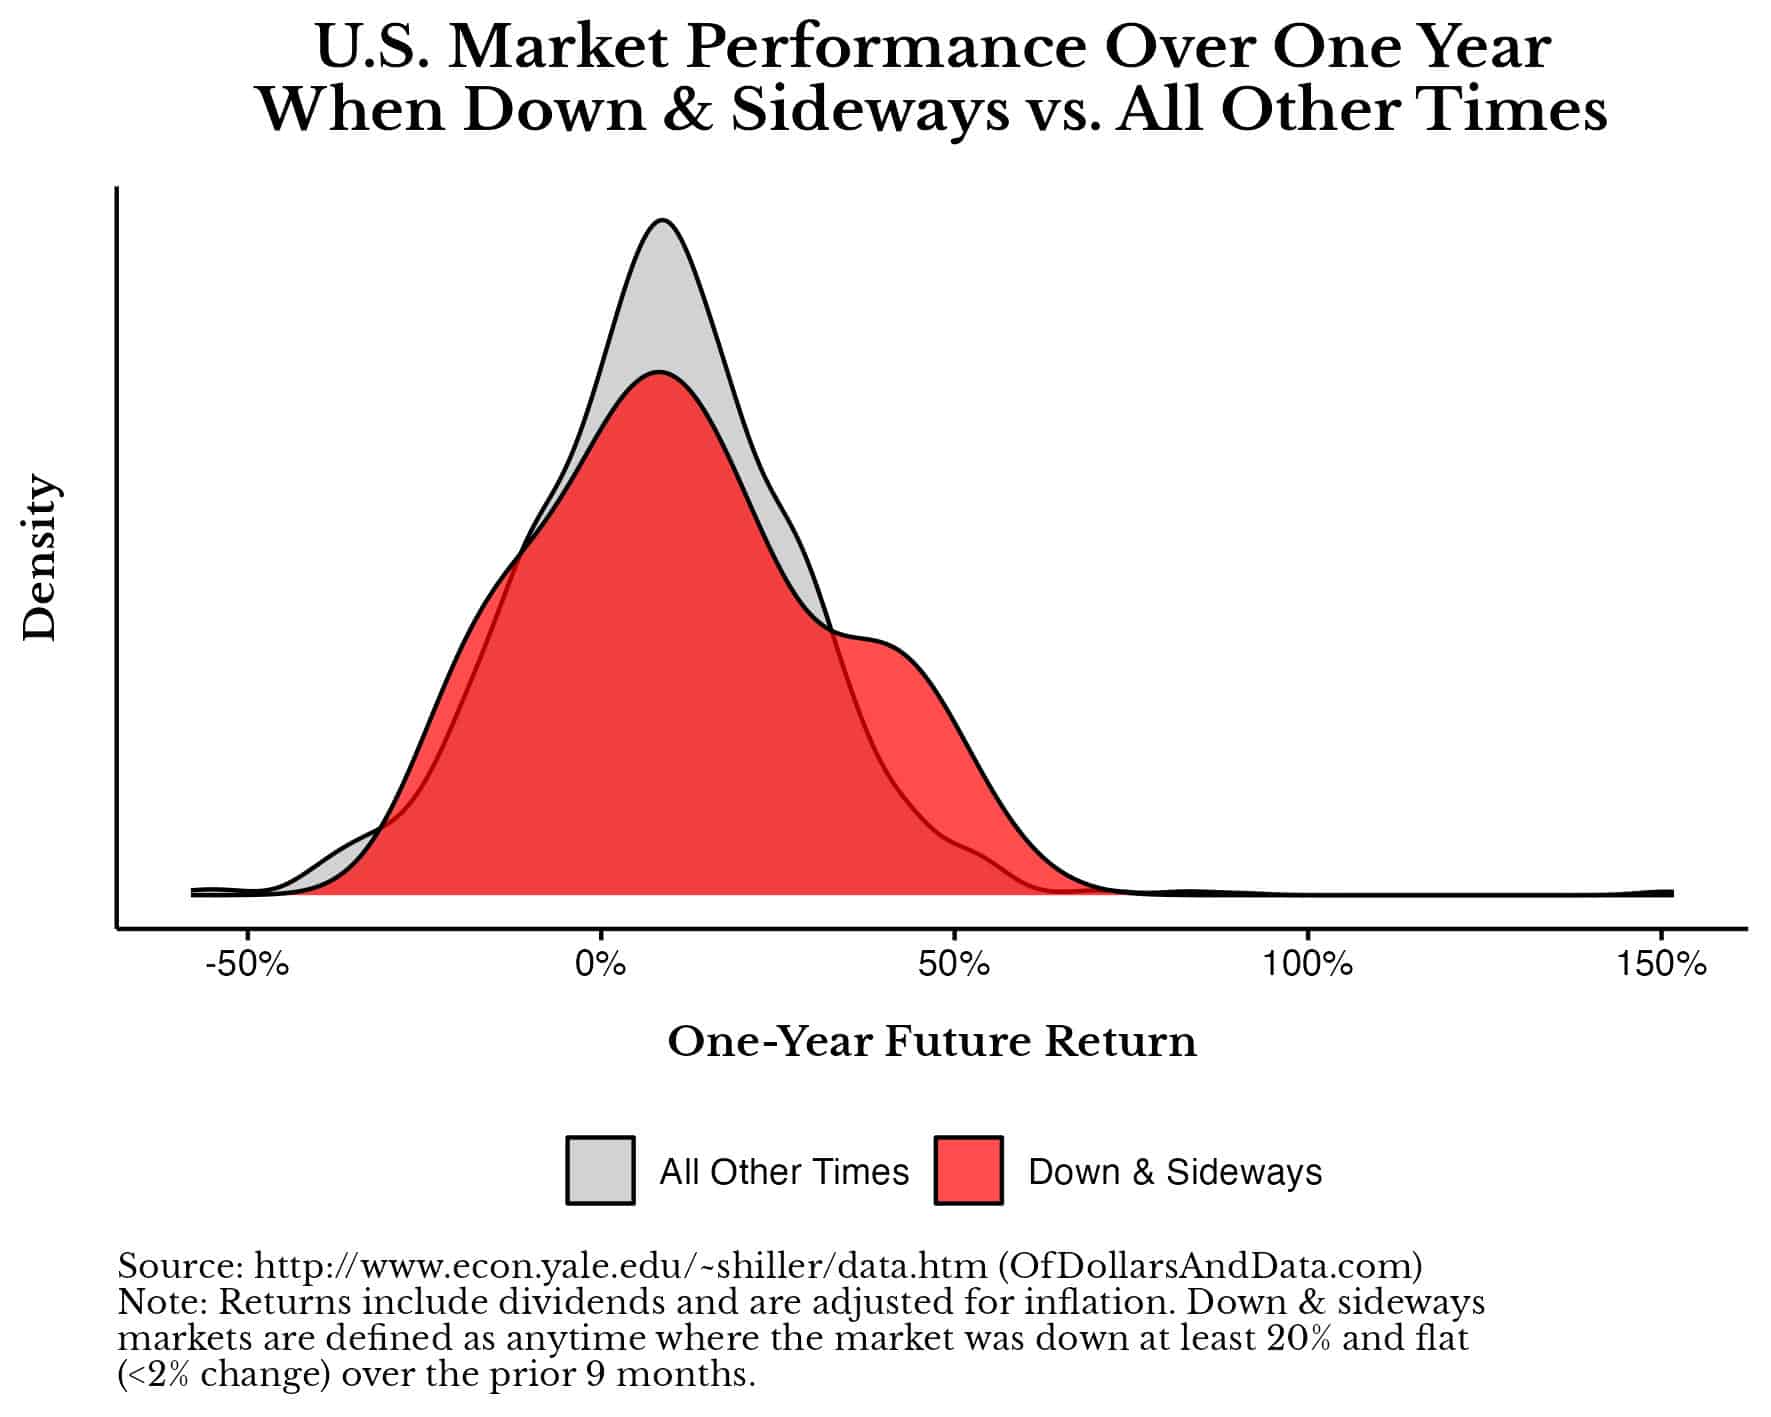 Distribution plot showing future 1-year returns of U.S. stocks during down & sideways markets vs. all other times.